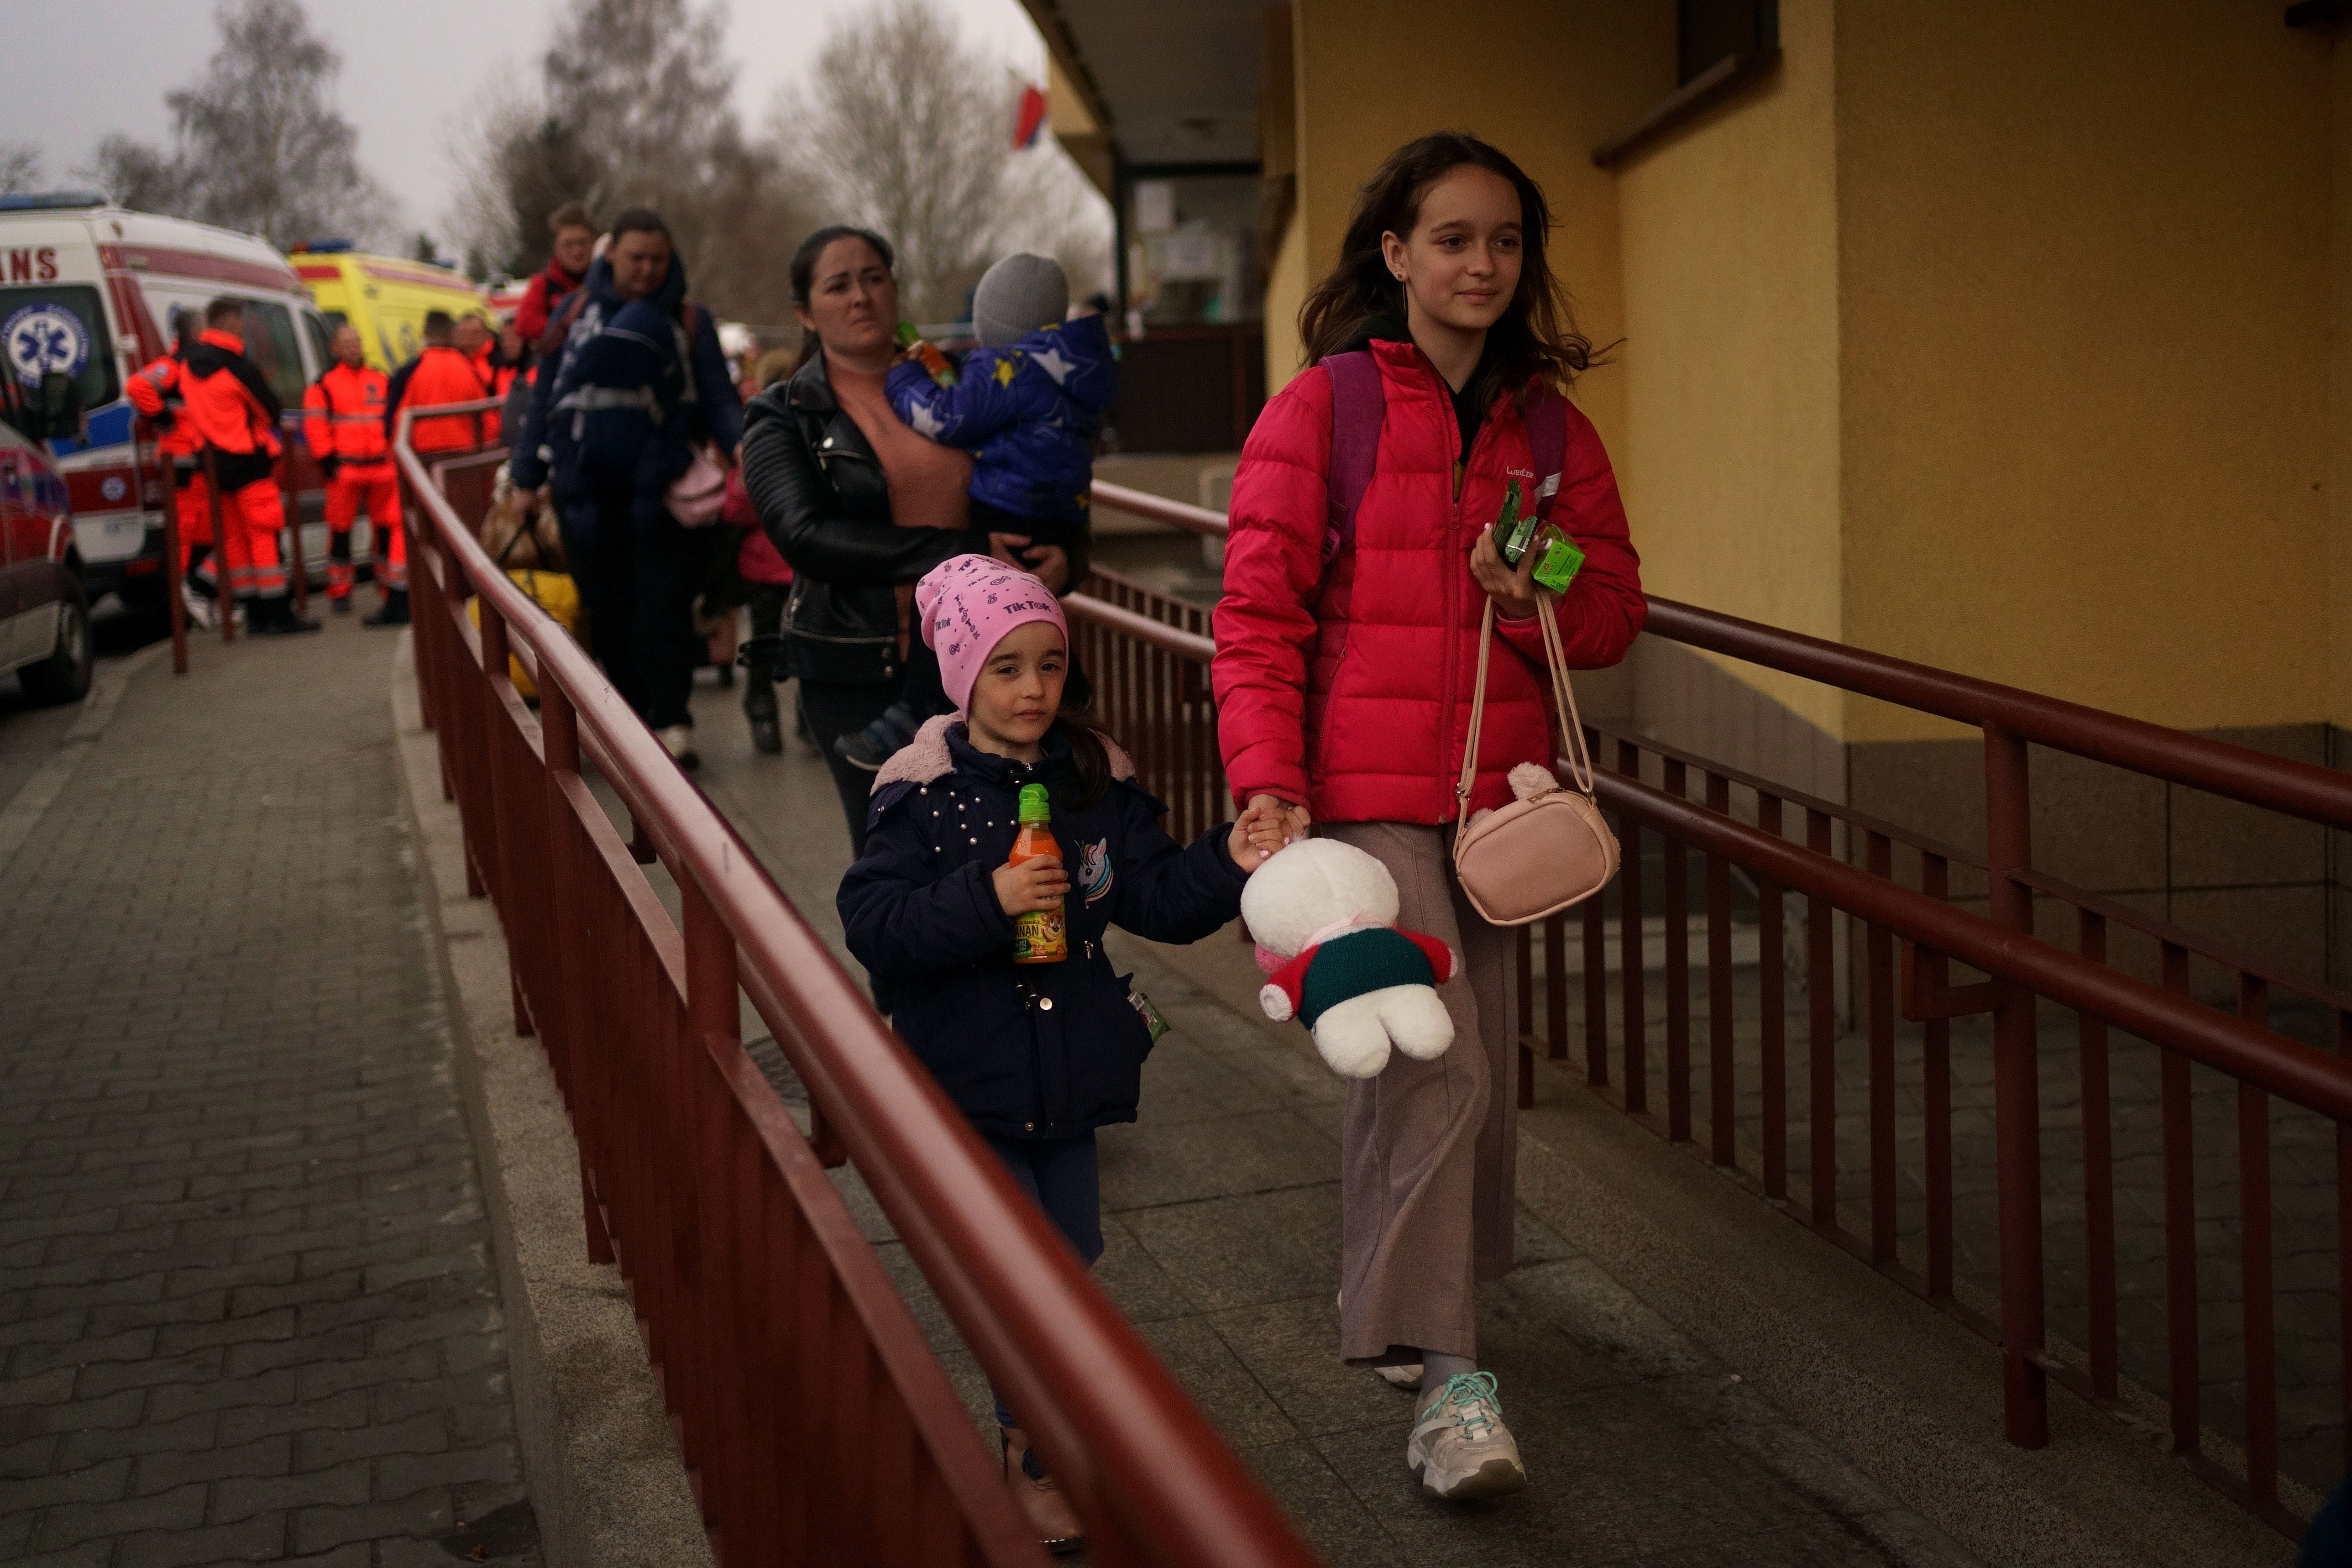 Two Ukrainian children walk out of the customs office at Przemysl Glowny train station in Poland, after disembarking a train from Ukraine to flee the Russian invasion (Victoria Jones/PA)